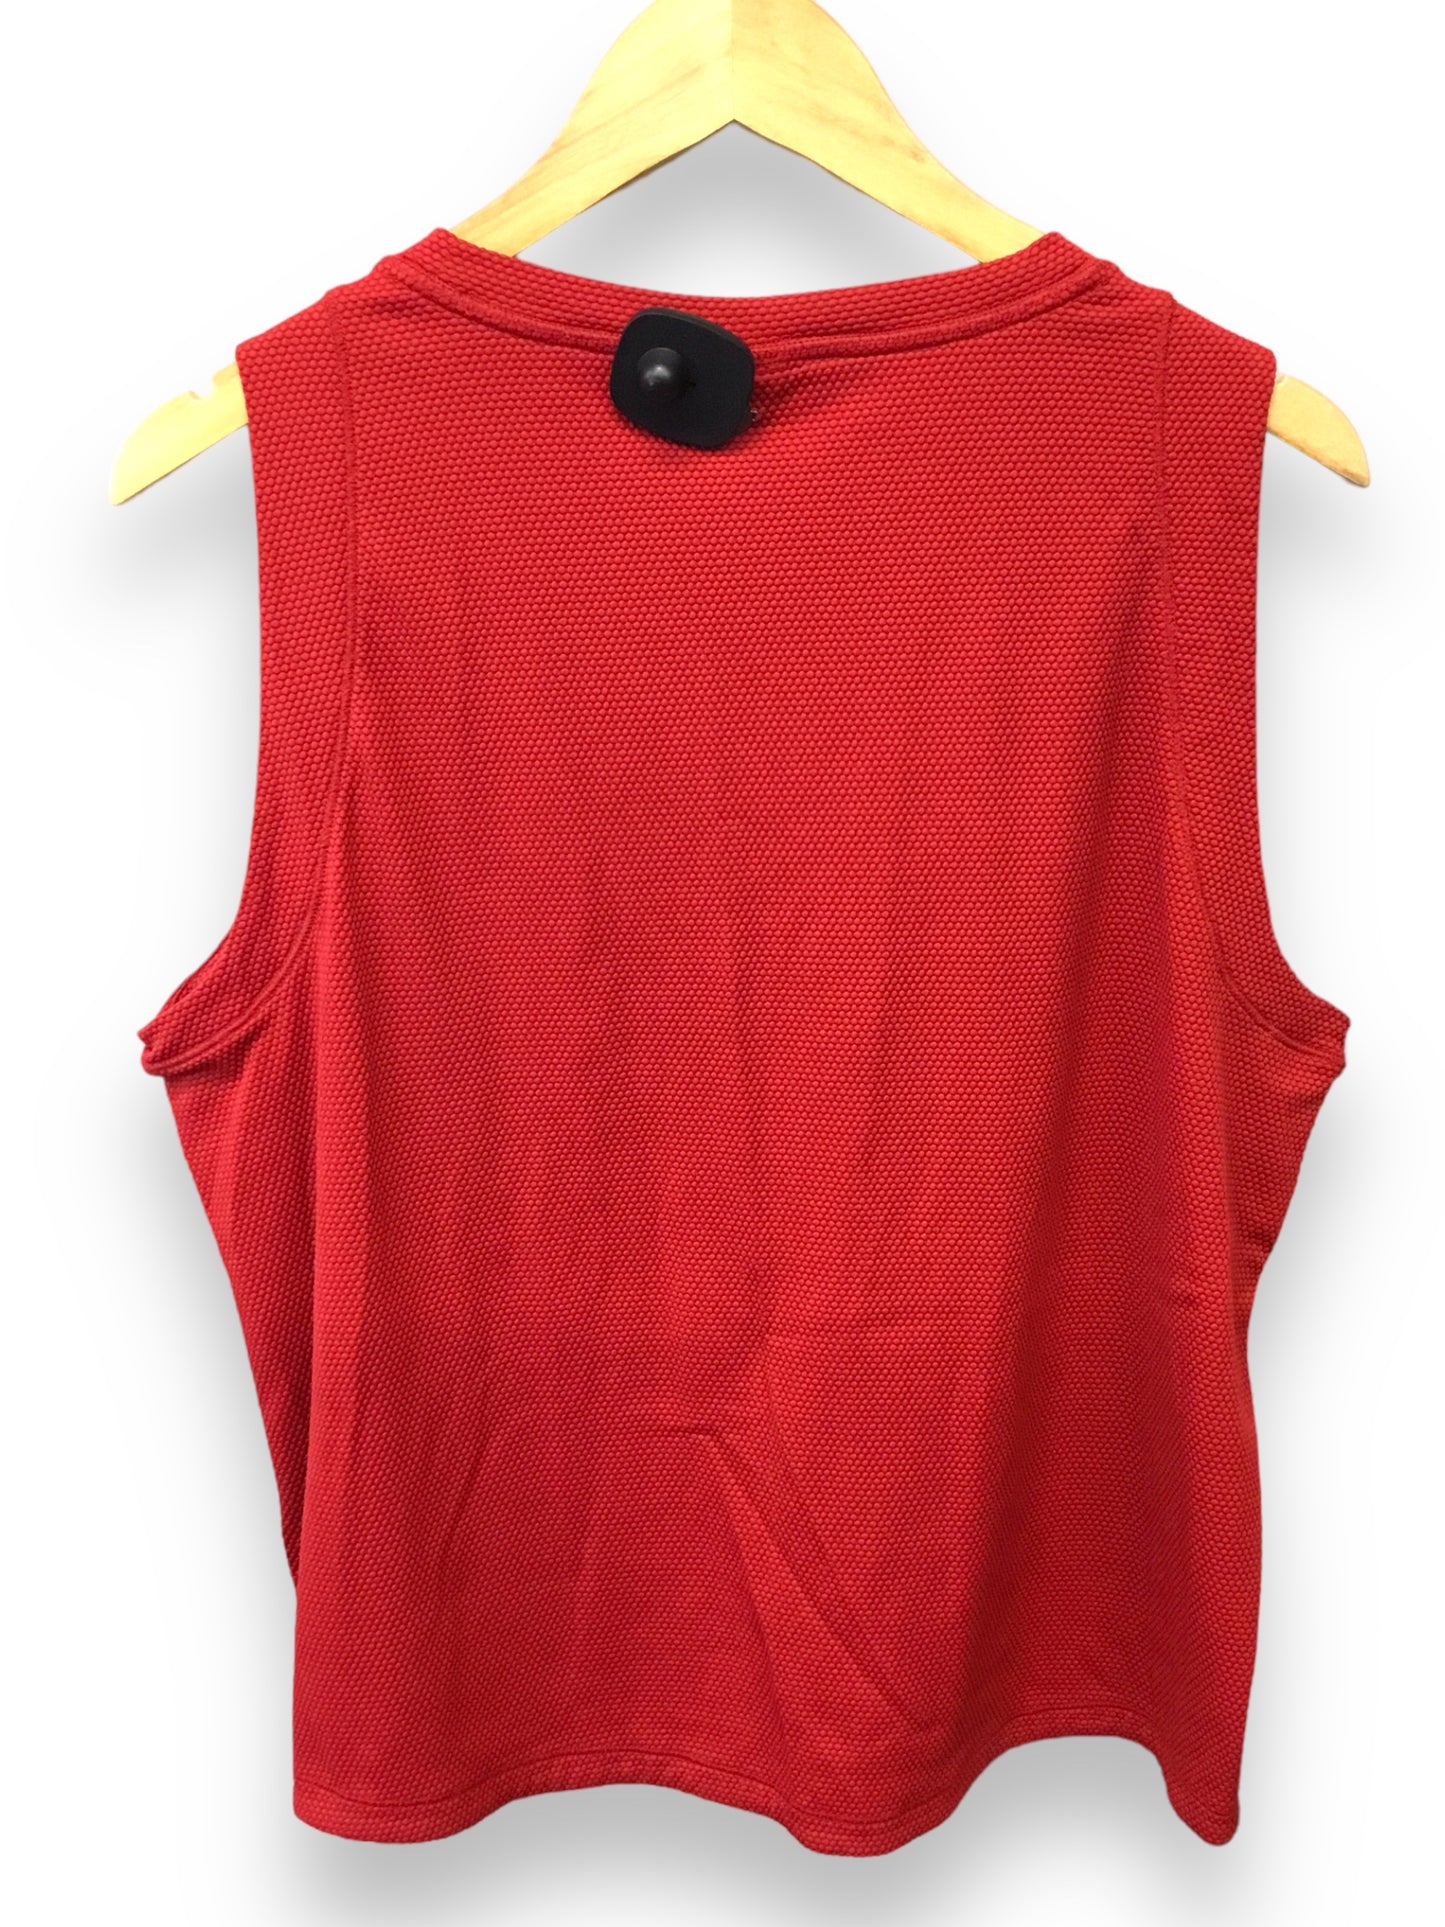 Athletic Tank Top By Calia  Size: L